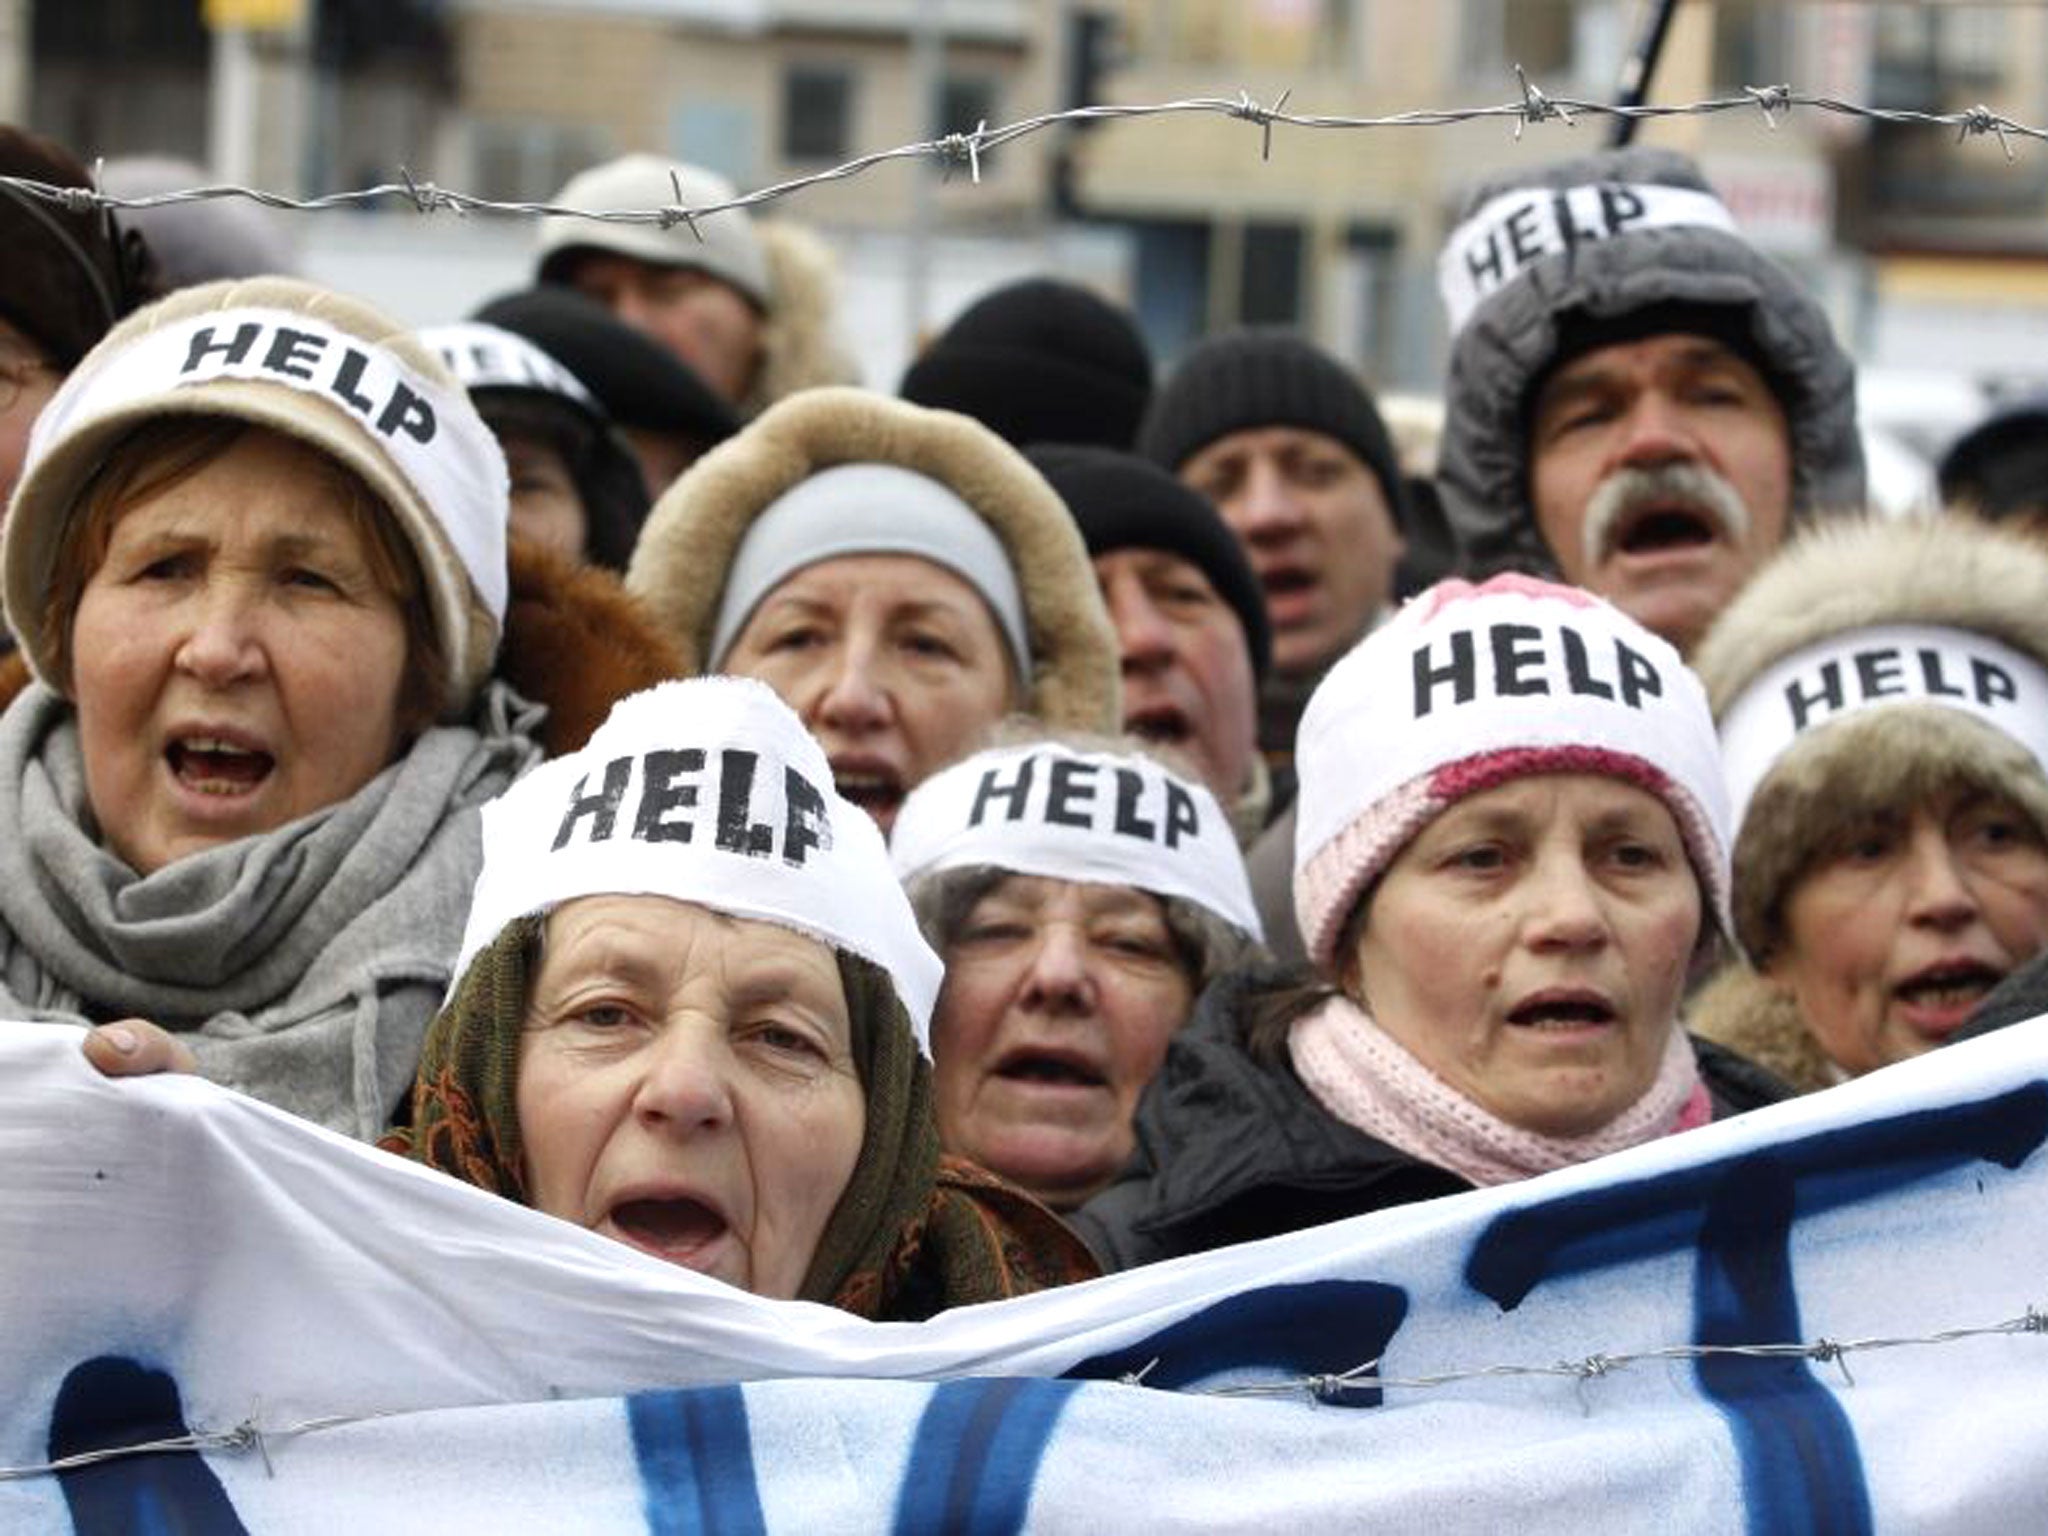 Protesters wearing headbands reading 'Help' shout slogans during an action entitled 'Impose sanctions - stop the violence' in front of the European Union delegation in Ukraine in Kiev. Participants of the rally urged the European Union to immediately impo